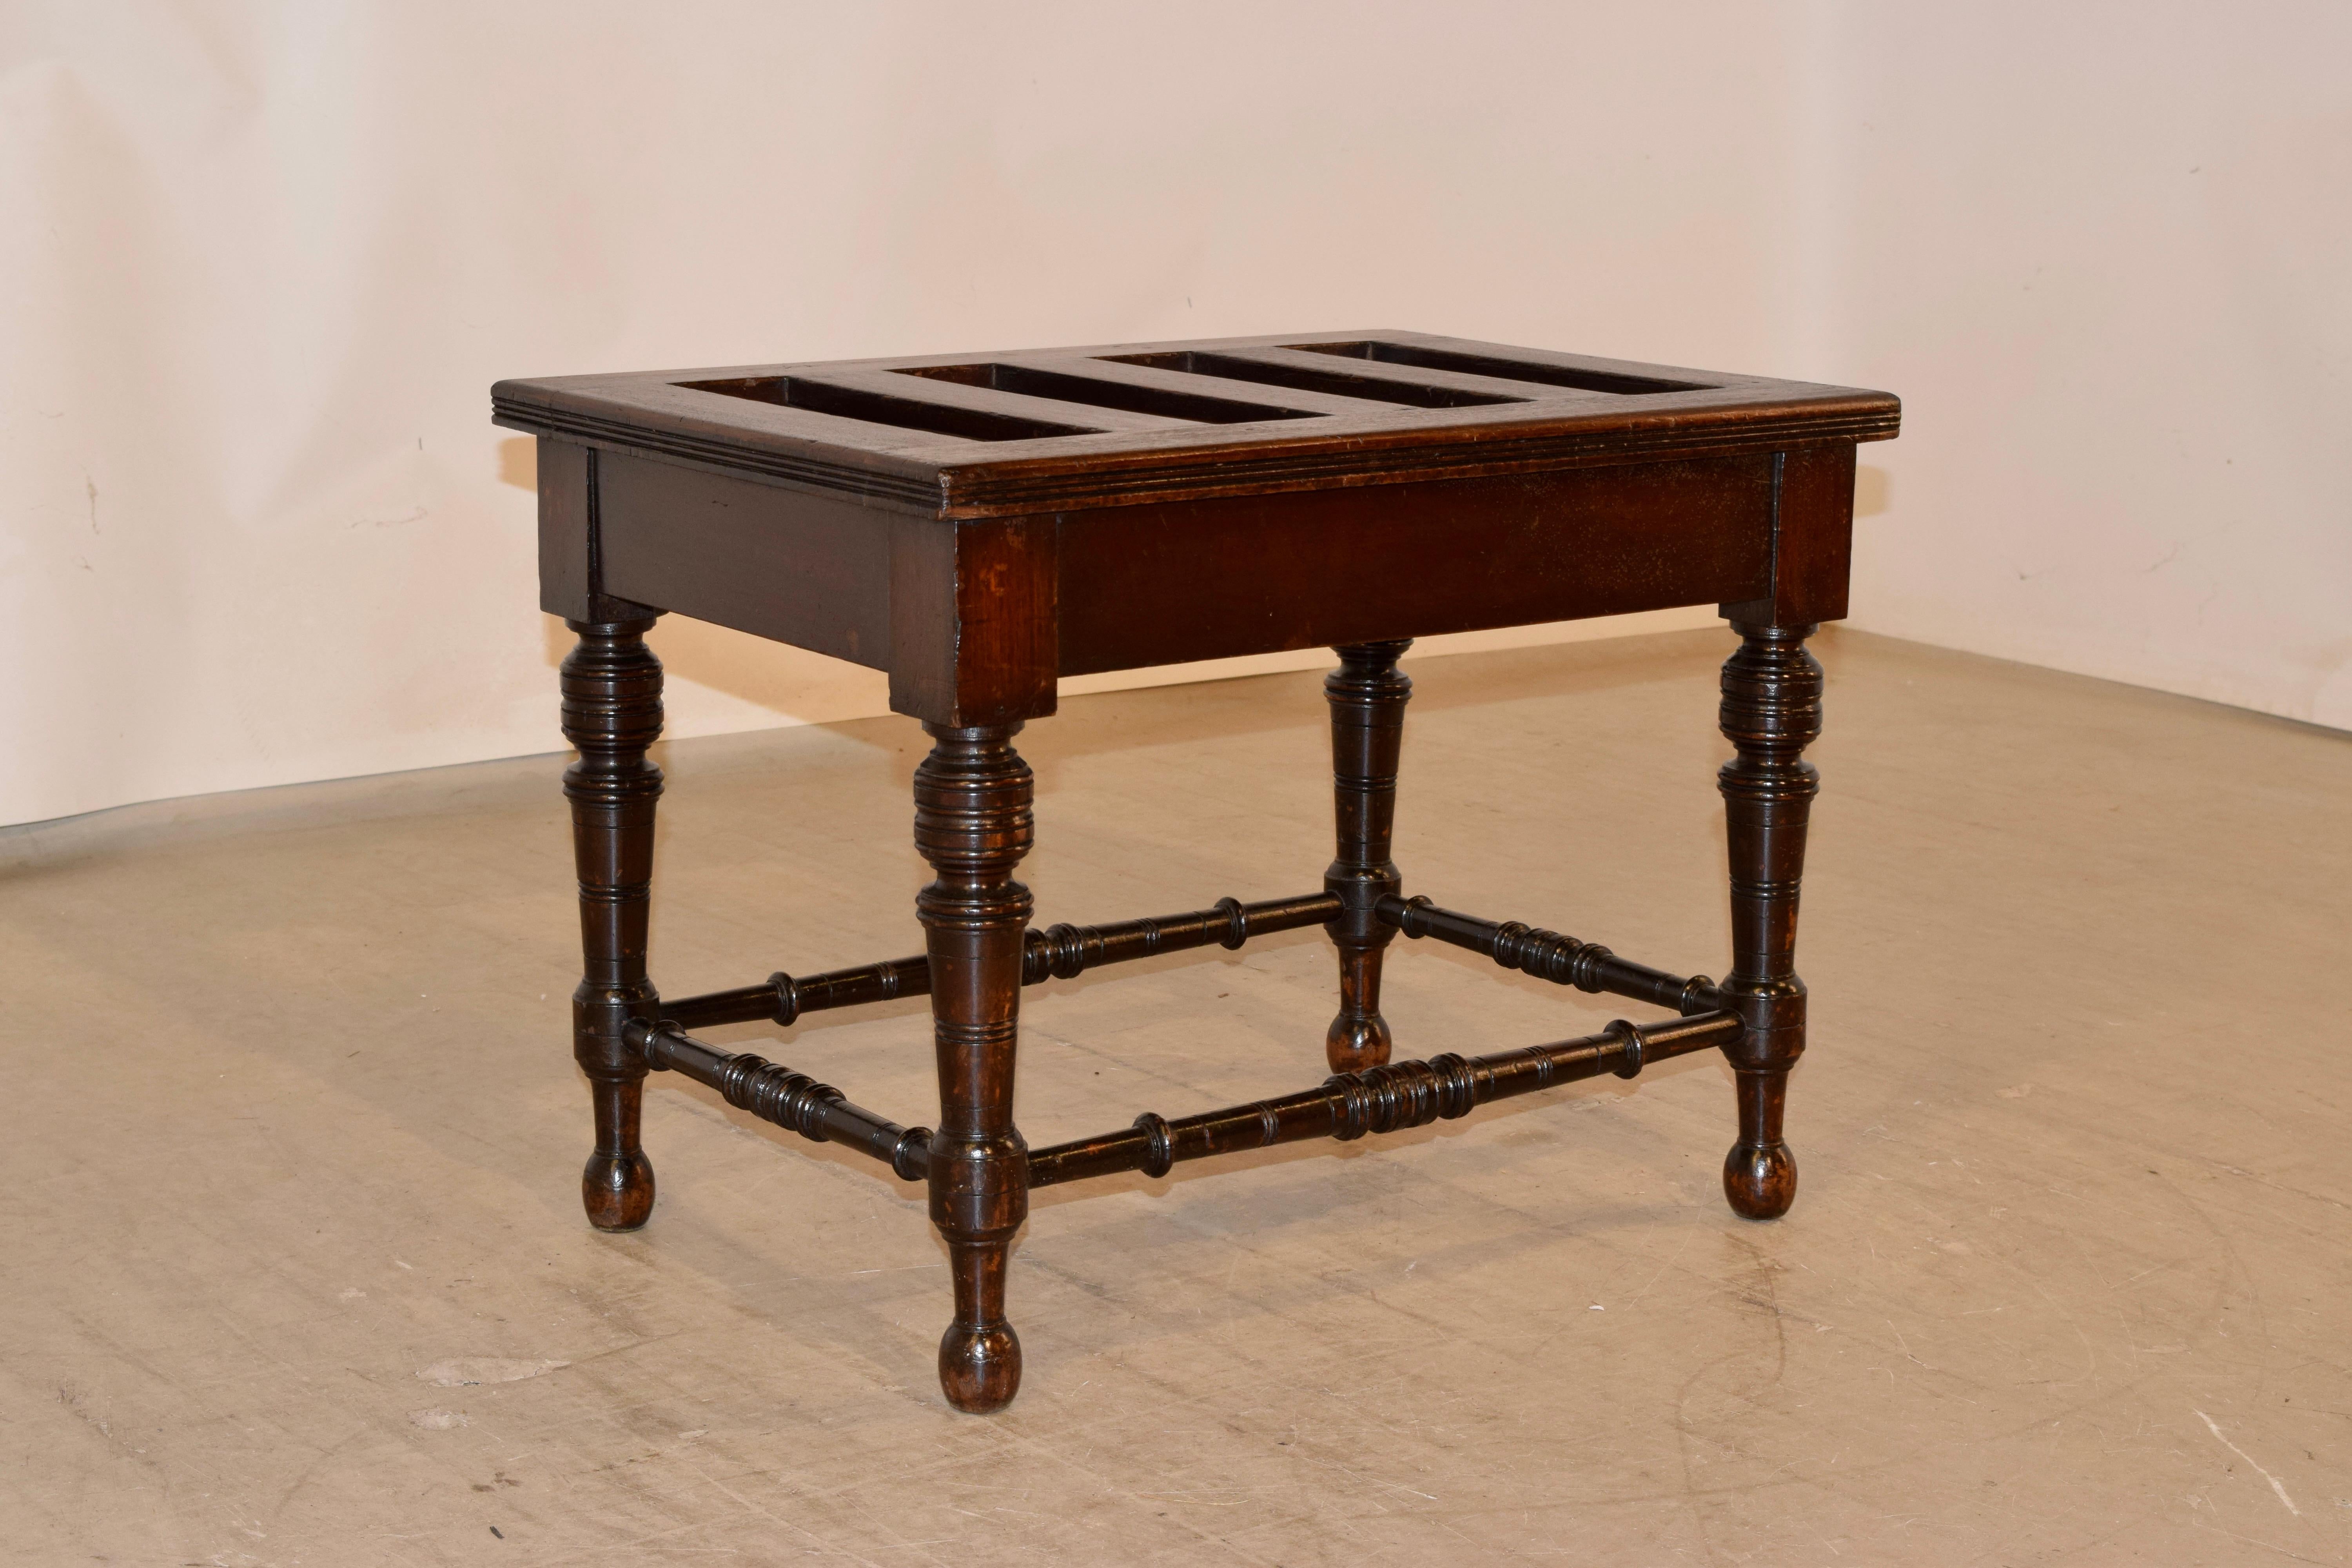 19th century mahogany luggage stand from England with a slatted top with a routed edge, following down to a simple apron and supported on hand turned legs, joined by hand turned stretchers.